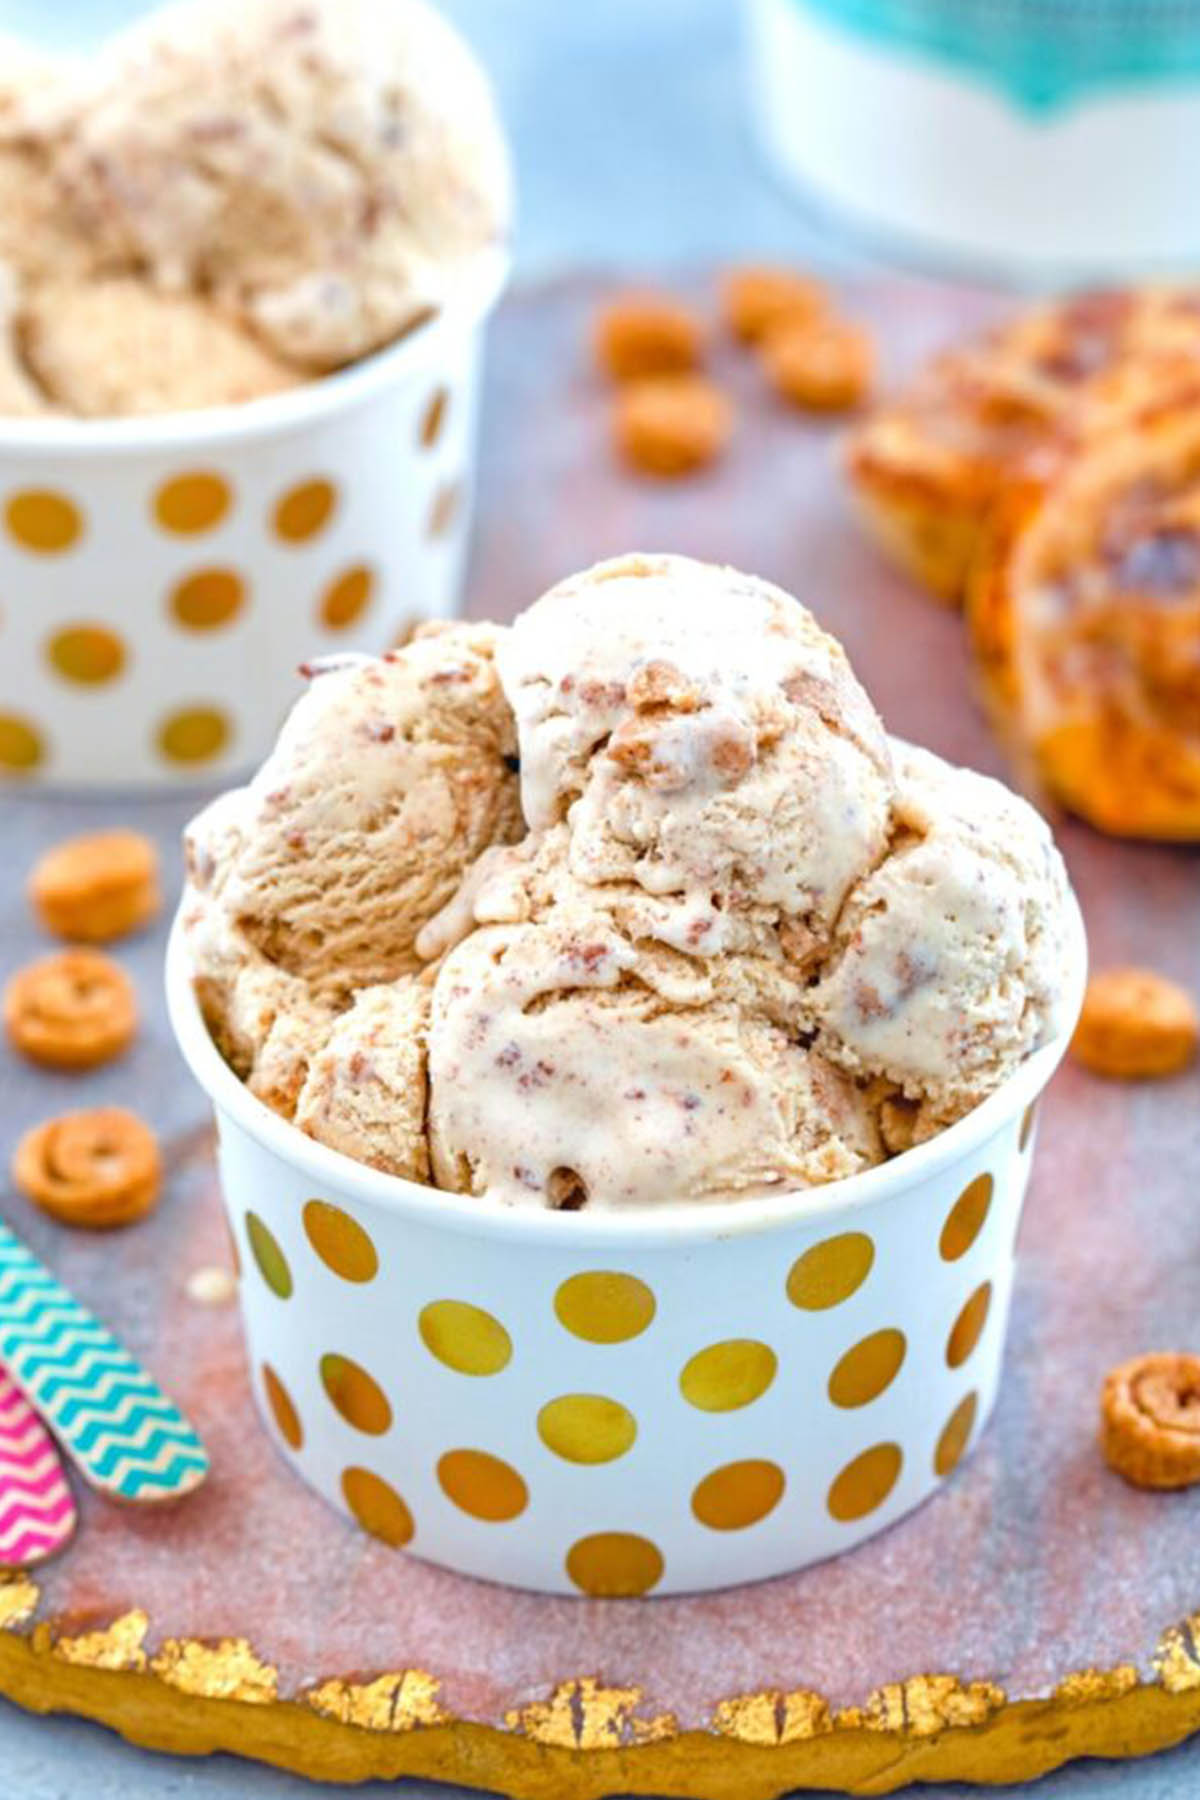 cinnamon roll ice cream in a polka dot container.